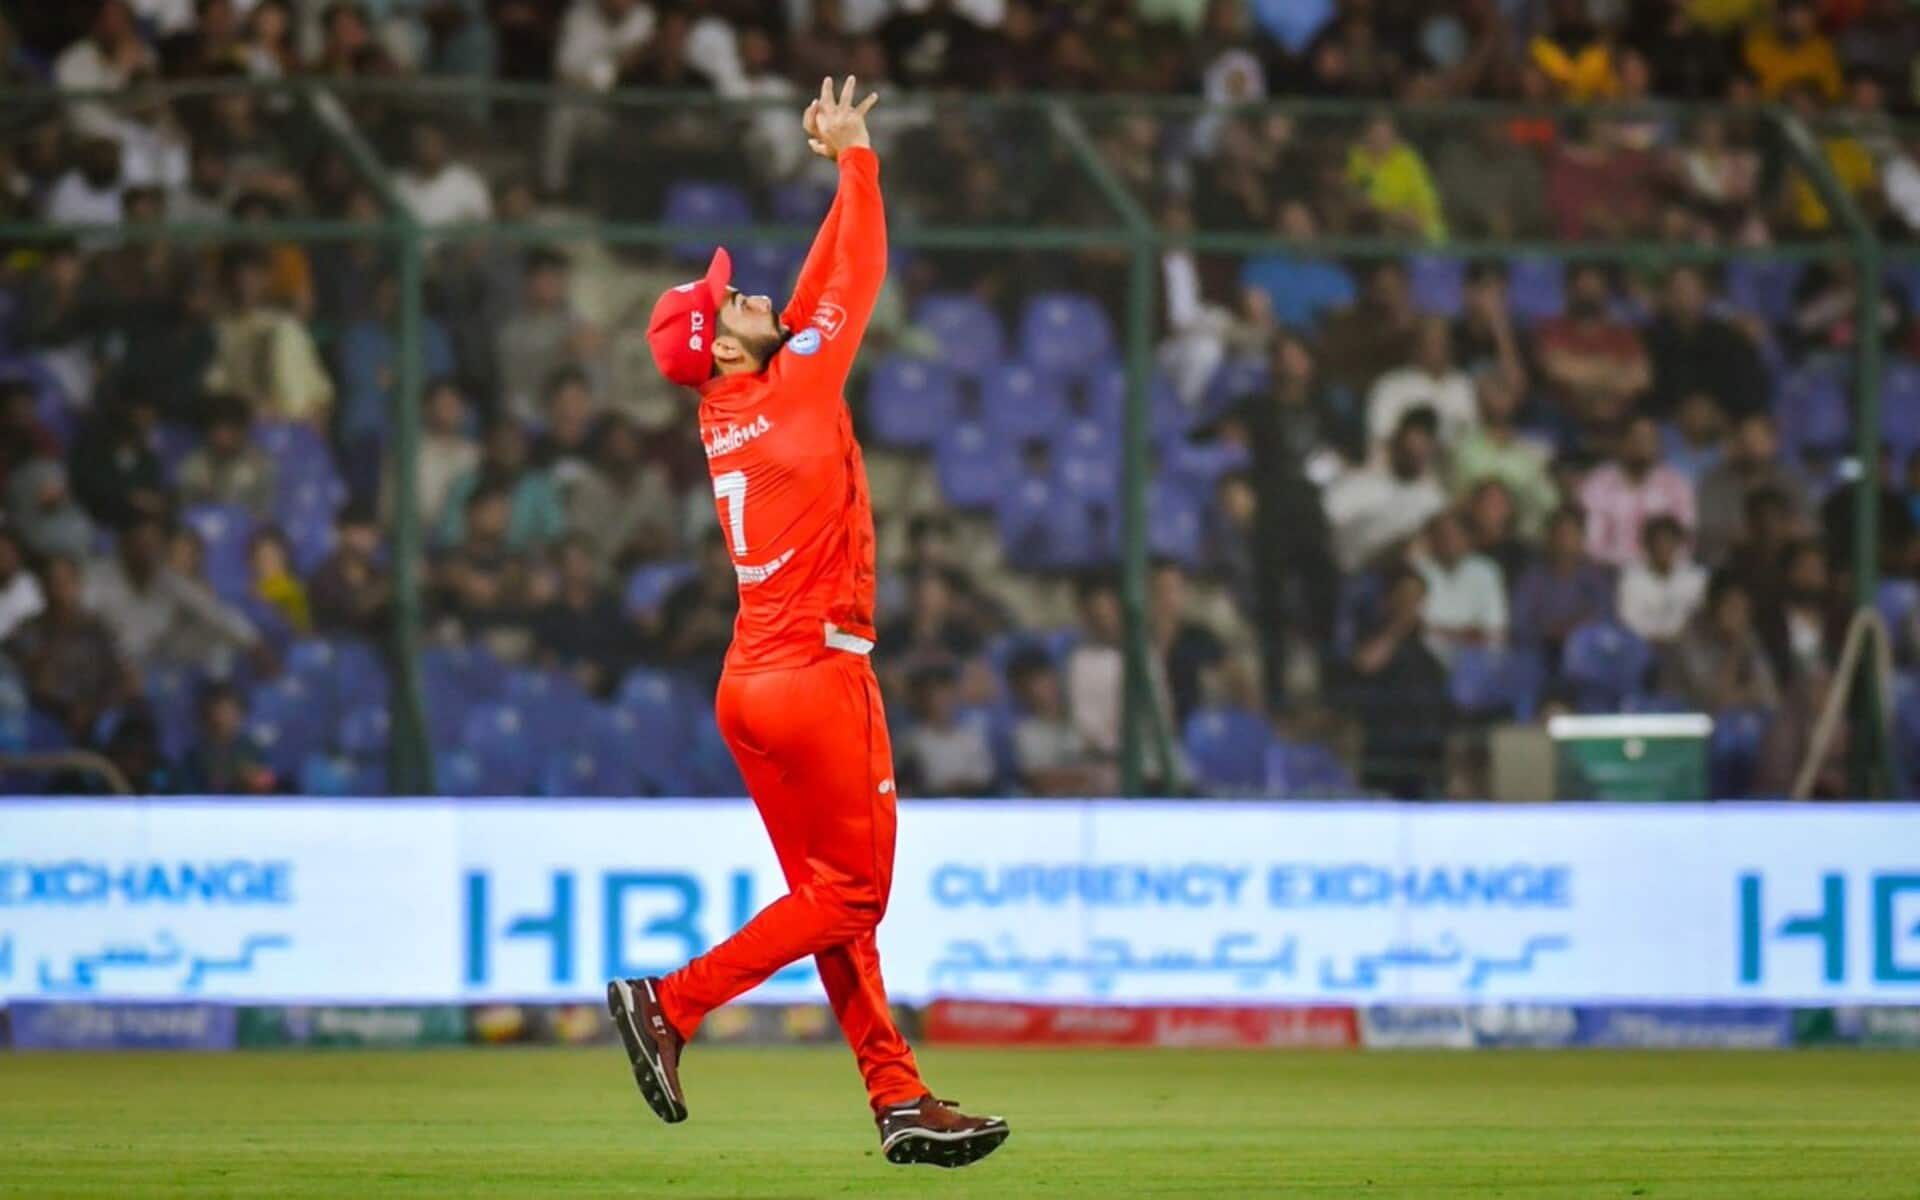 Shadab Khan took four catches in this innings (Source: PSL/PCB)